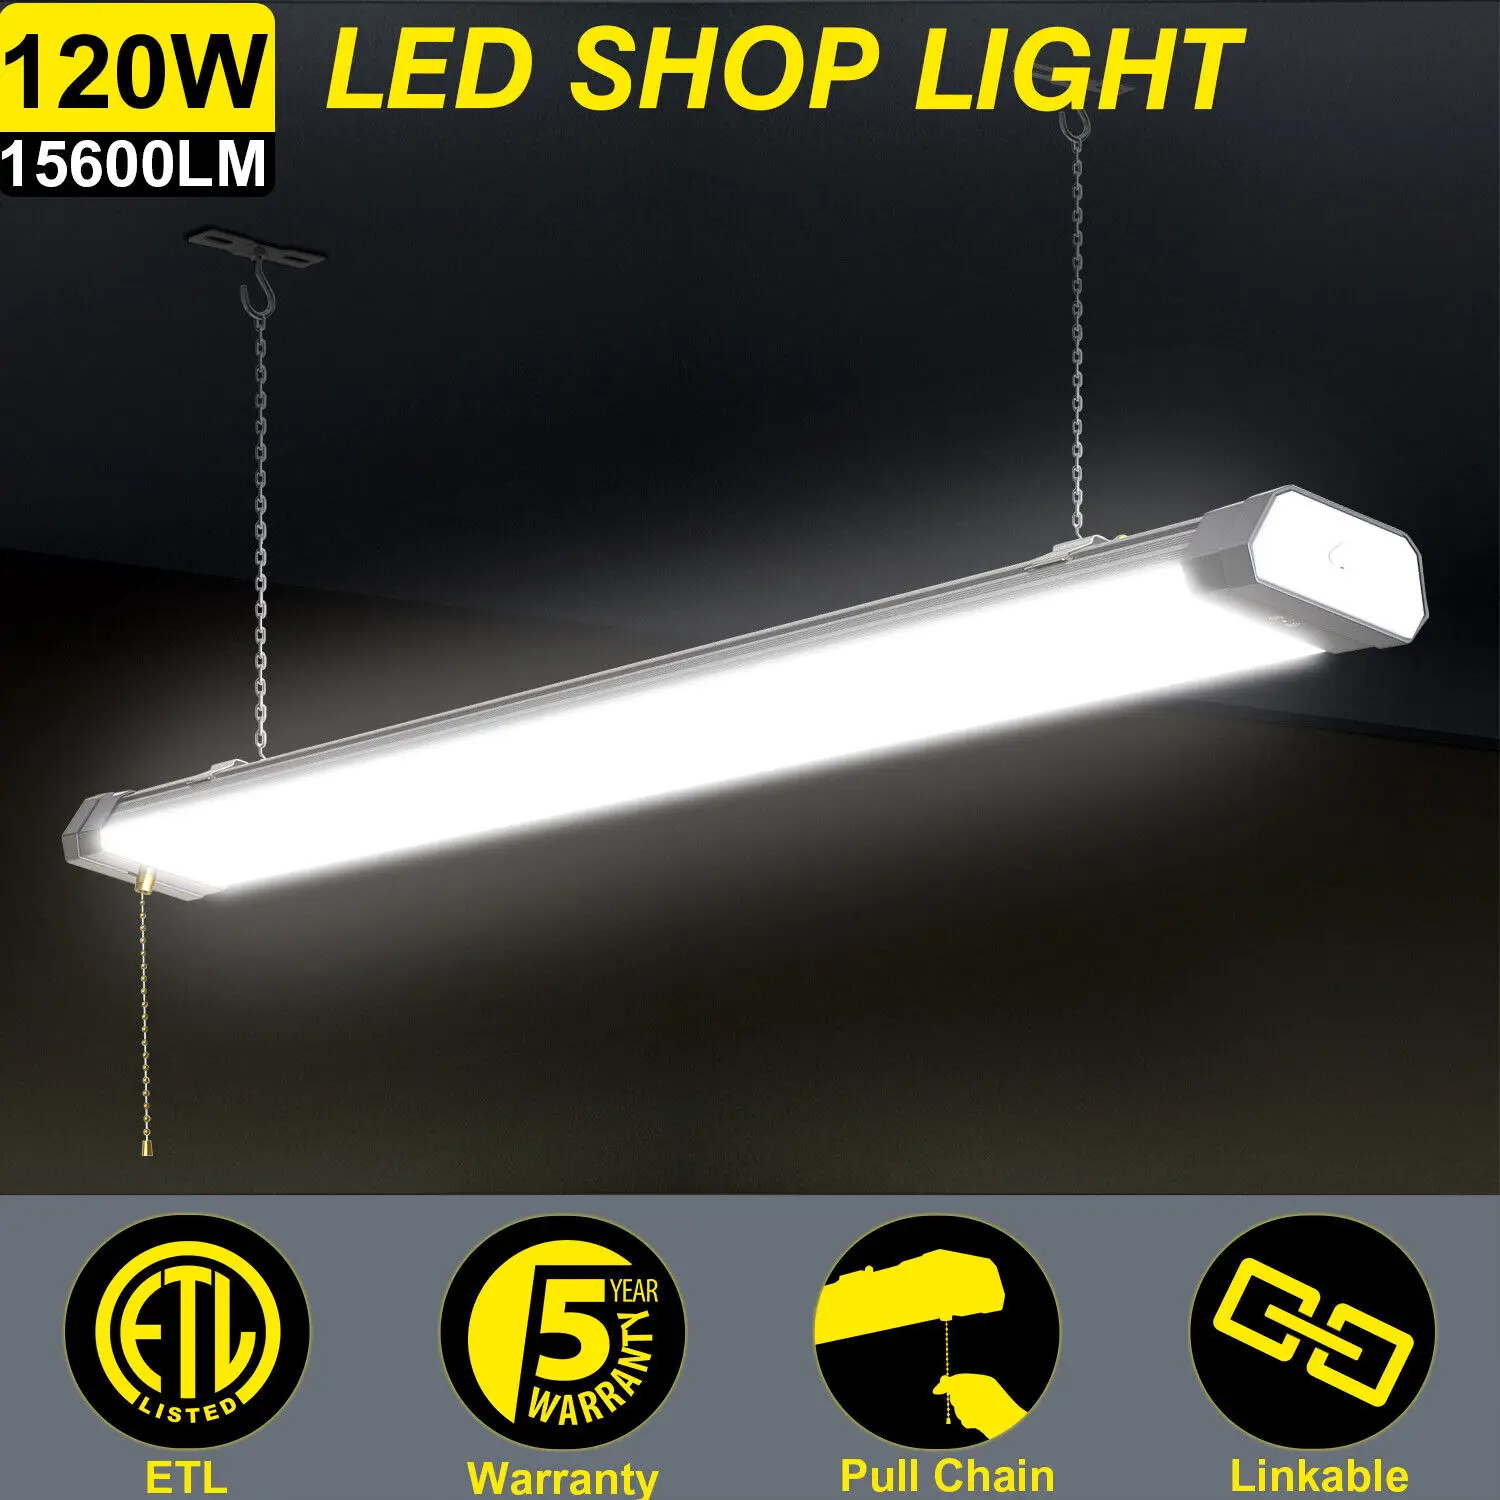 120W LED Shop Light Linkable, Linear High Bay/ Low Bay Garage Lighting Fixture, 120V 15600LM Plug in, Pull Chain, 5000K Daylight